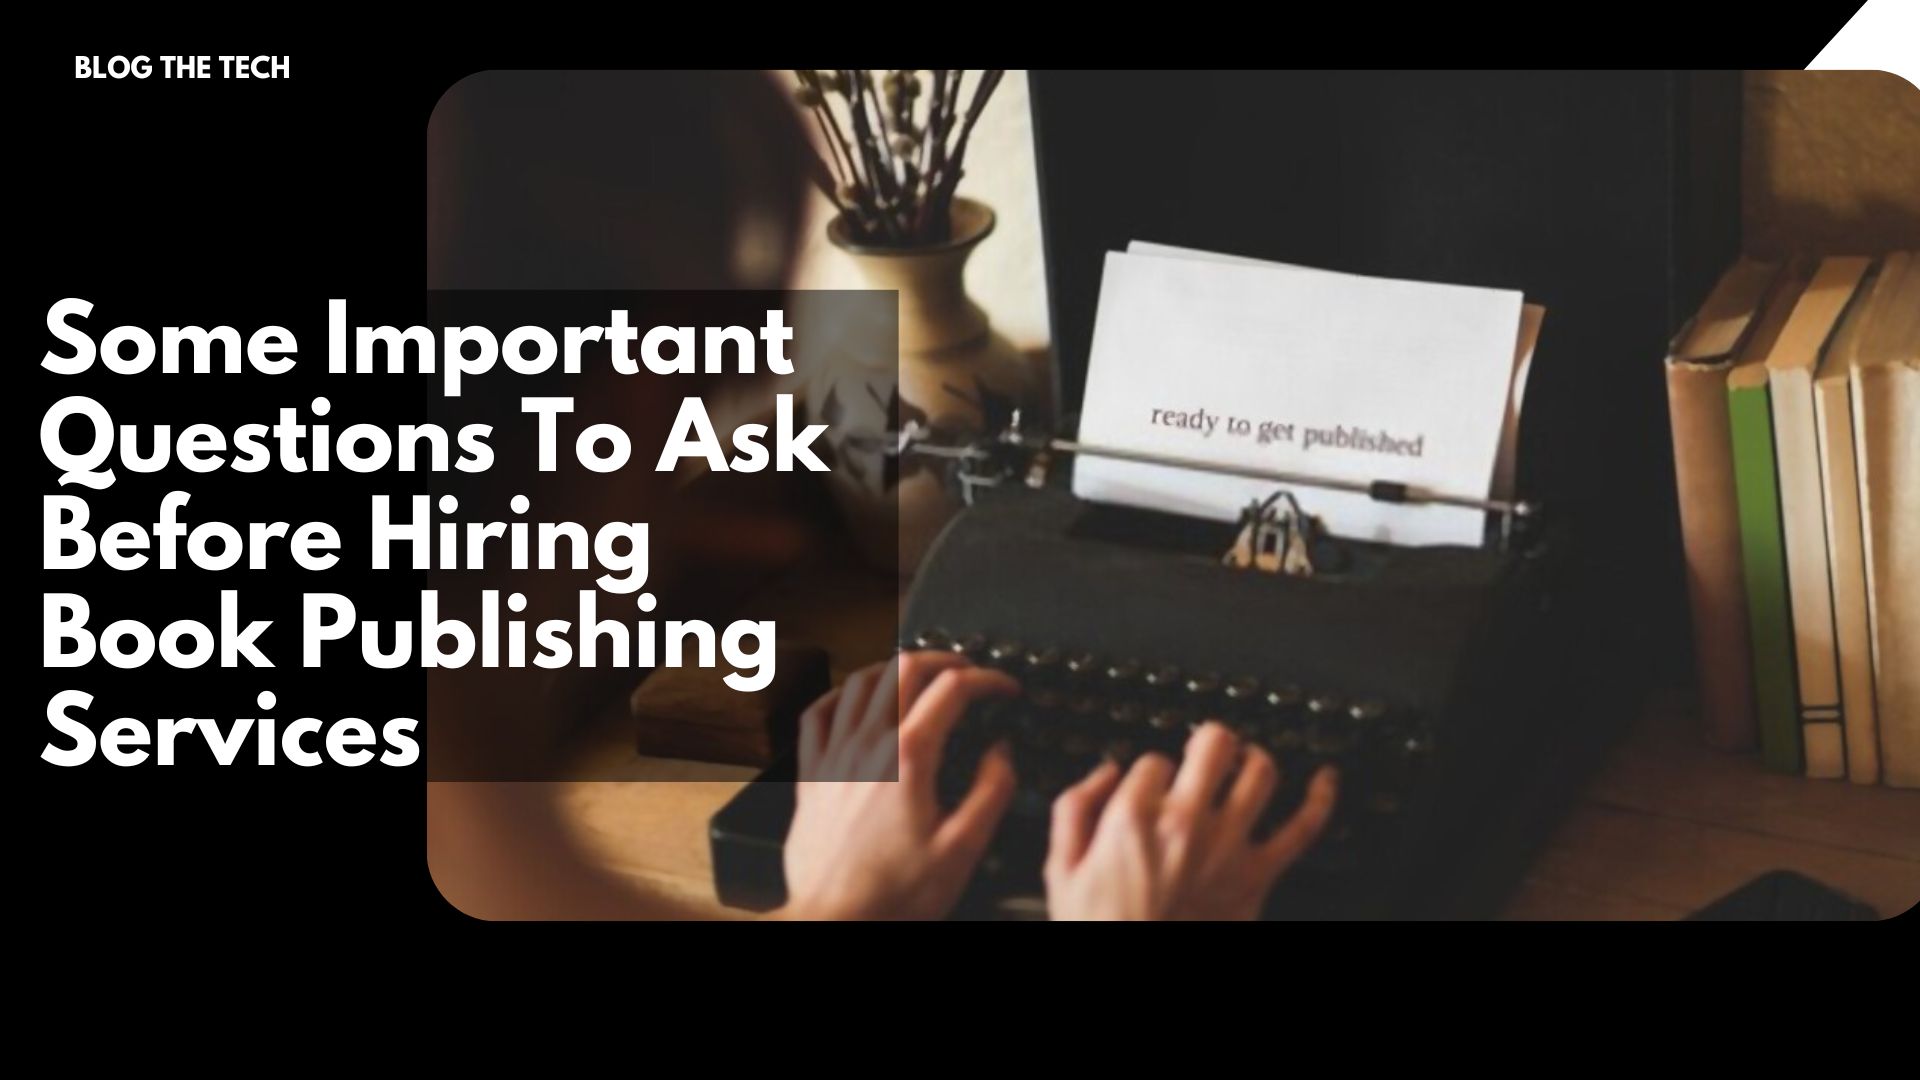 Hiring Book Publishing Services